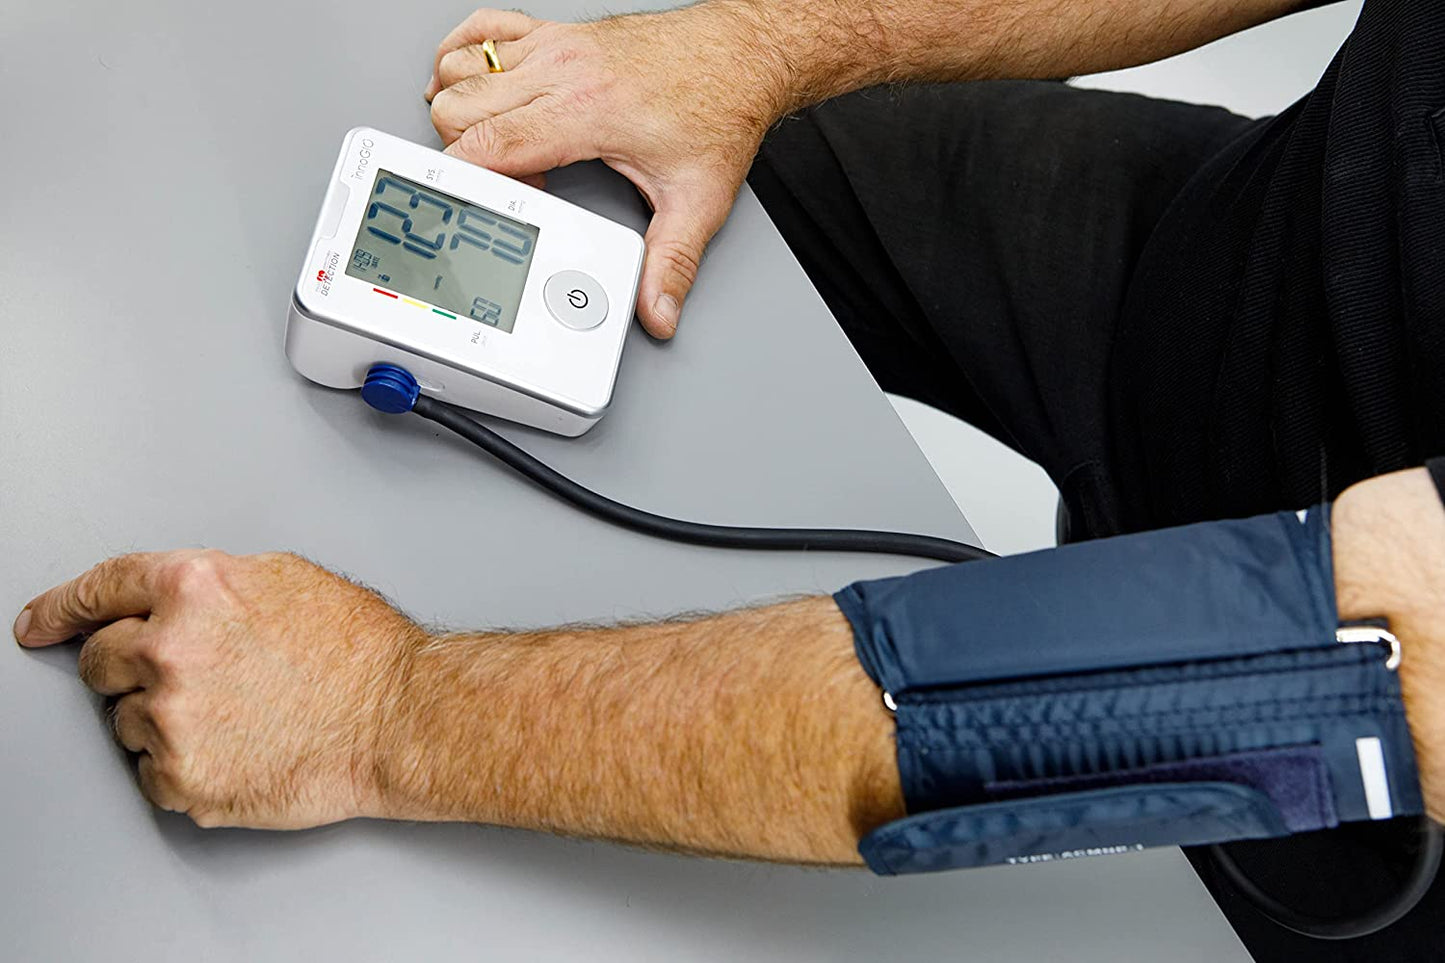 InnoGIO GIOpulse, Upper Arm Blood Pressure Monitor, with Heart Rate and Arrhythmia Detection, Automatic Sphygmomanometer, Fast and Accurate 